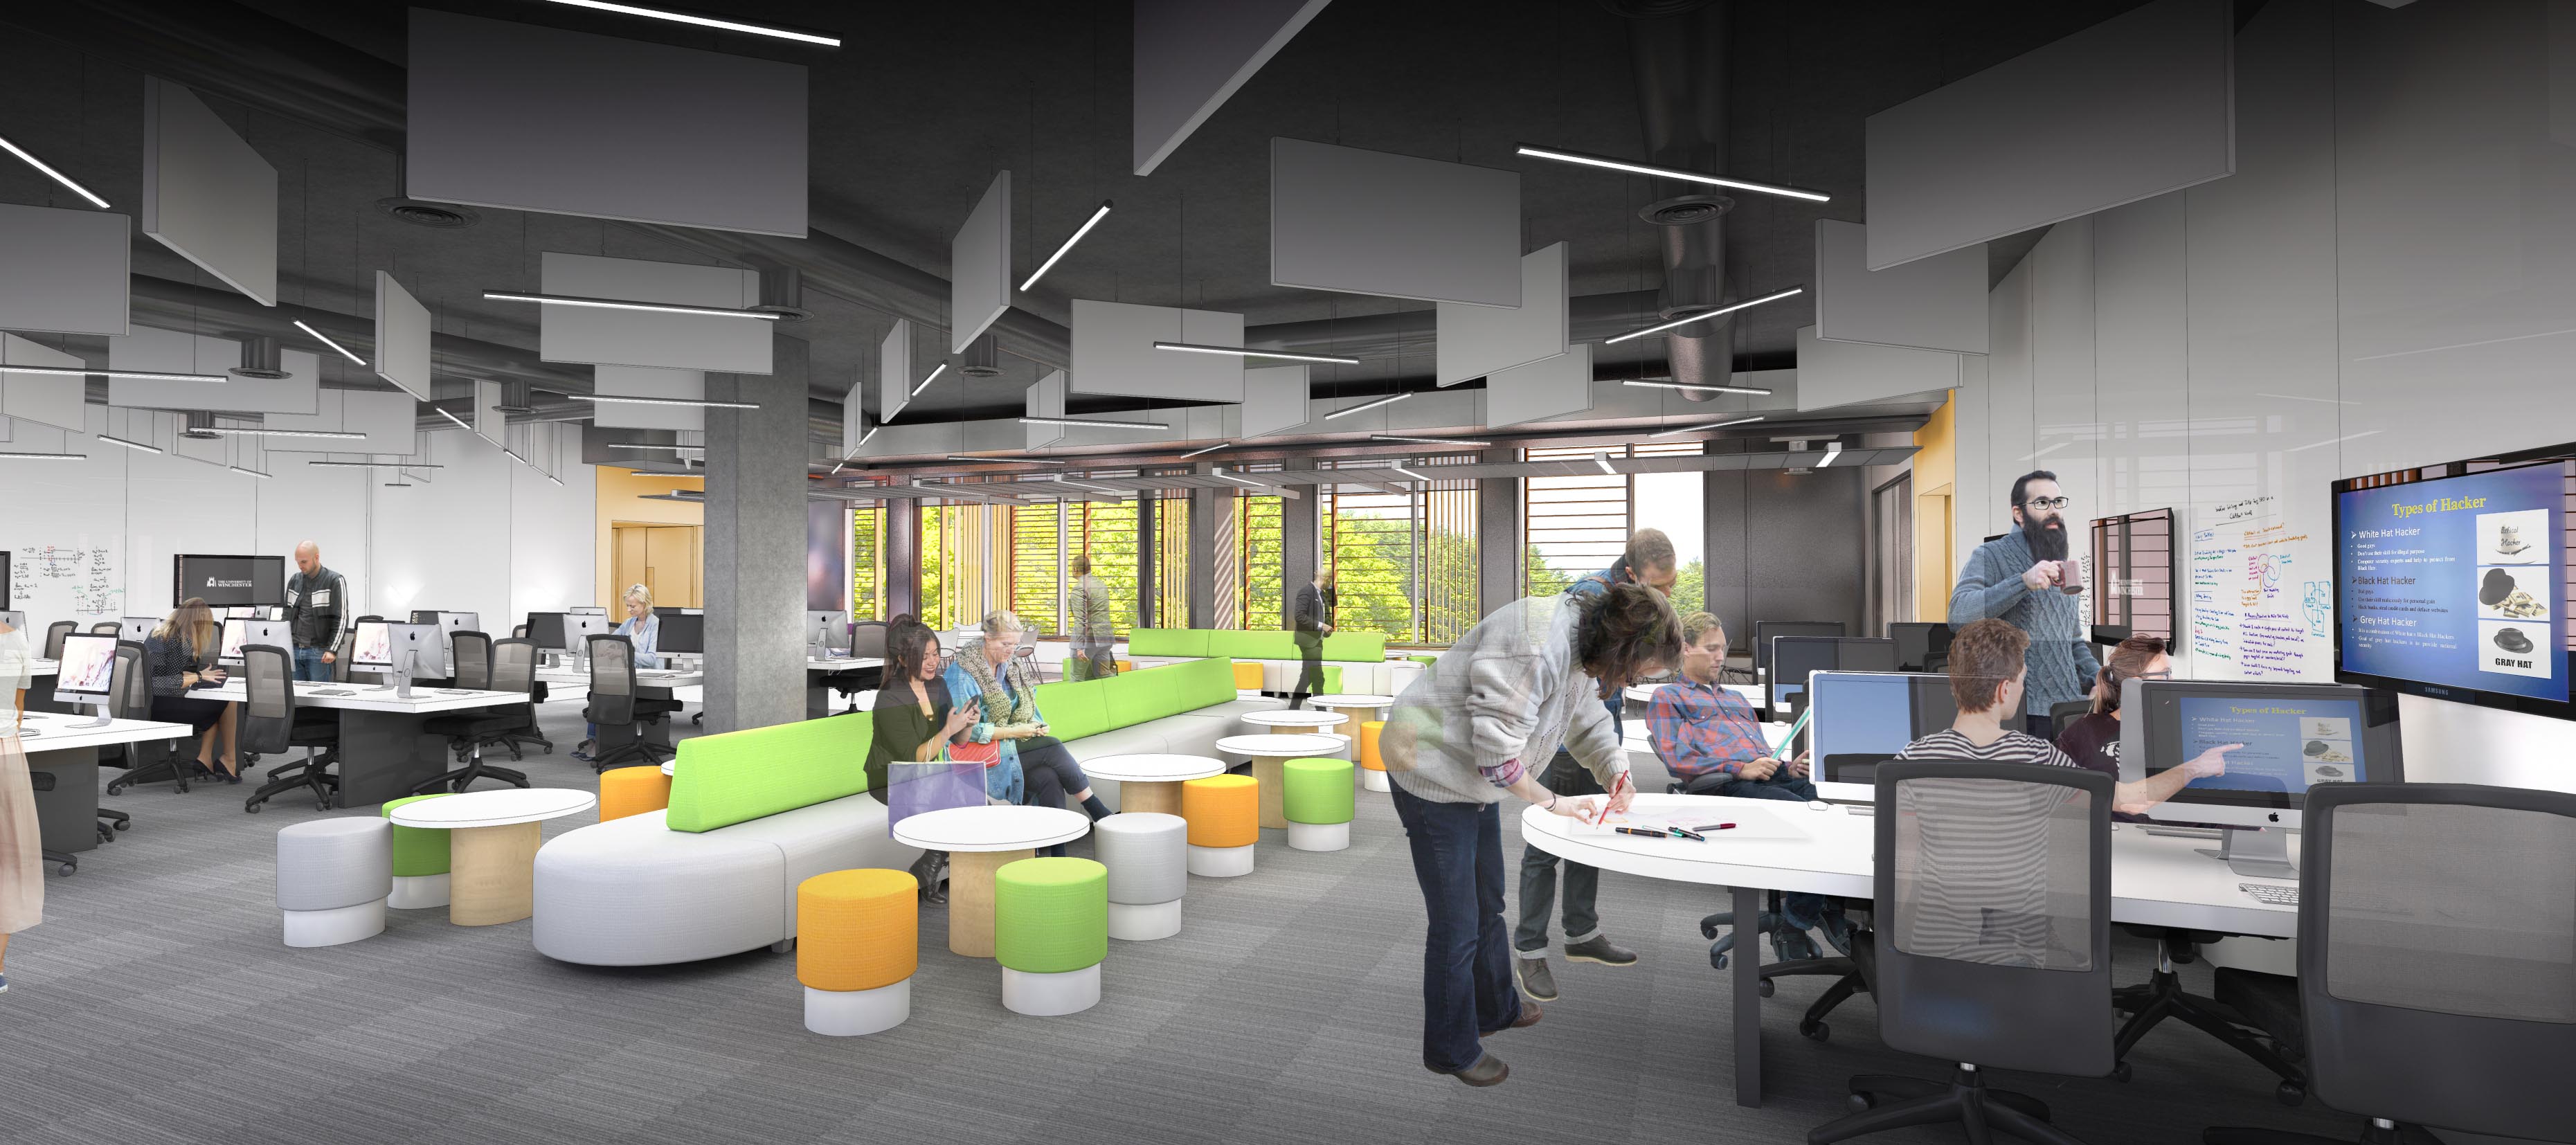 Architect's impression of a large open plan teaching space with computer workstations and yellow, green and grey seating